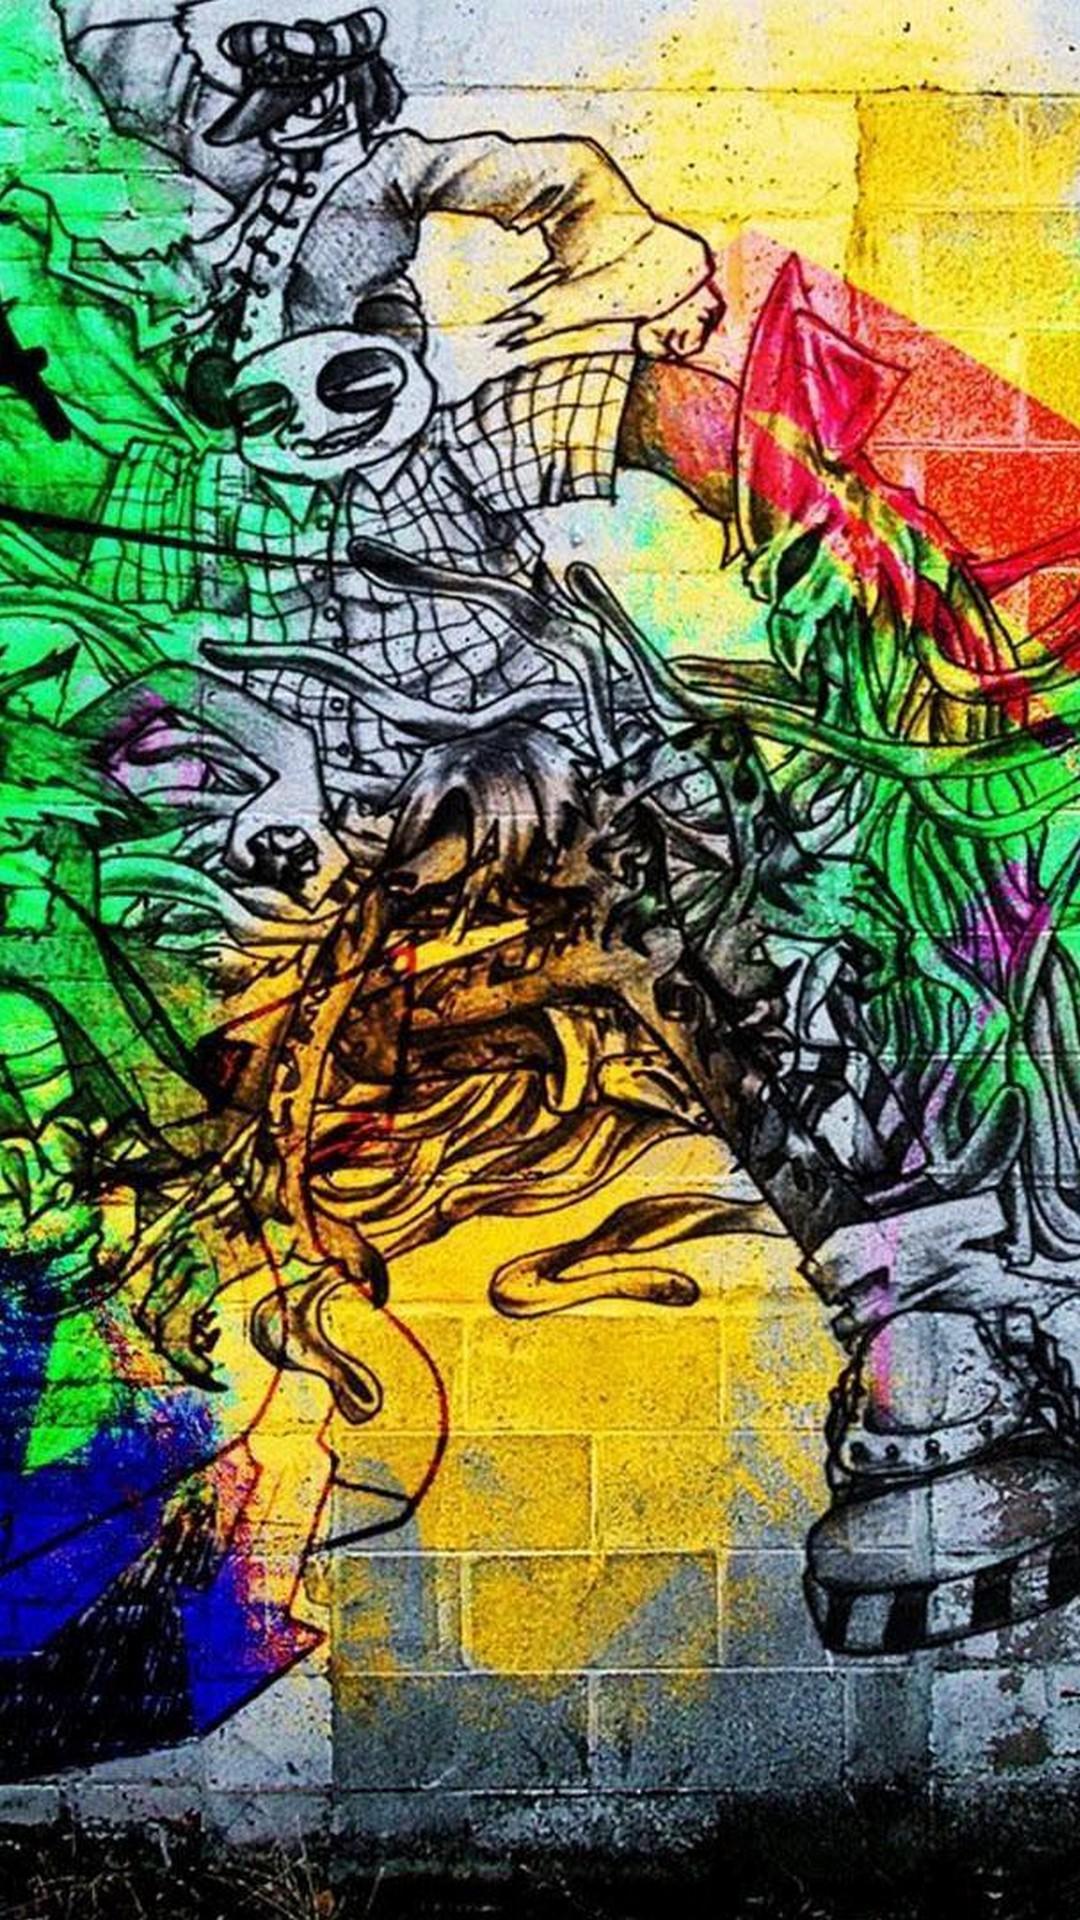 Colourful  Wallpaper  iPhone  Android  Colourful wallpaper iphone Graffiti  wallpaper Iphone wallpaper hipster